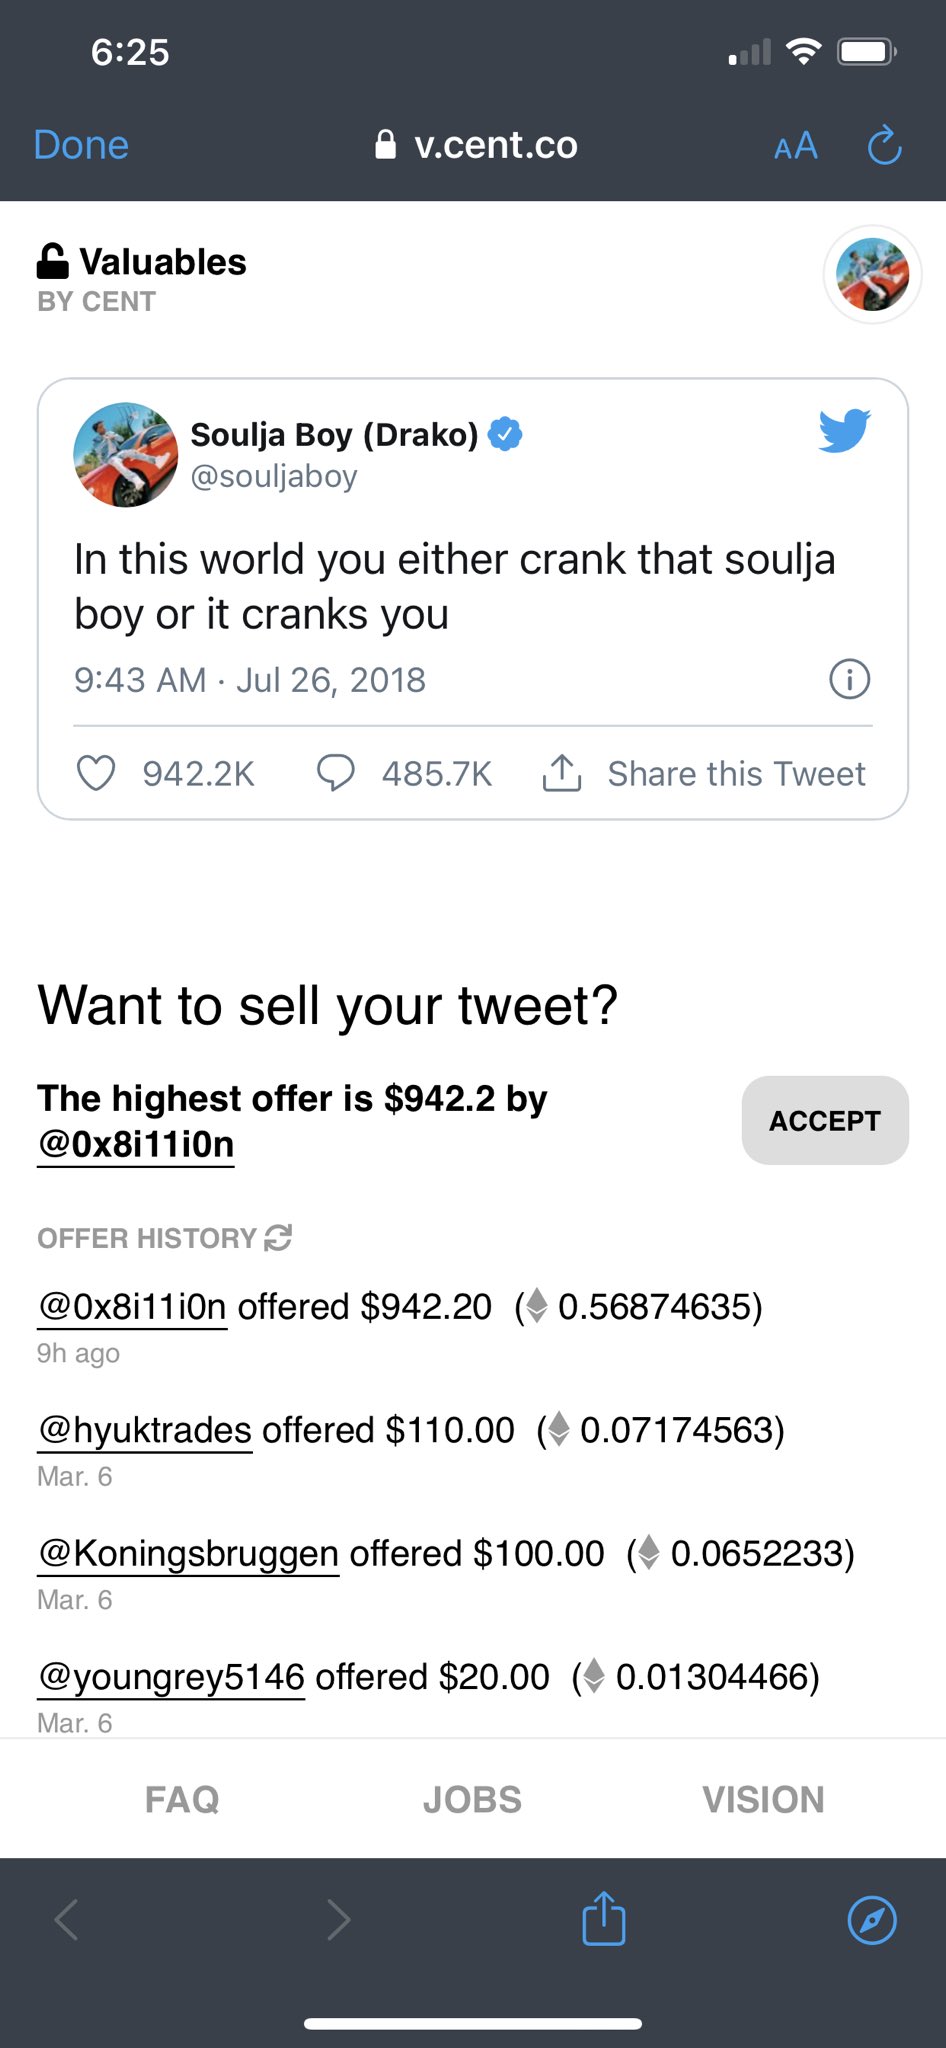 Soulja Boy Reportedly Promoted Multiple Scam NFT Projects, Twitter Sleuth  Says